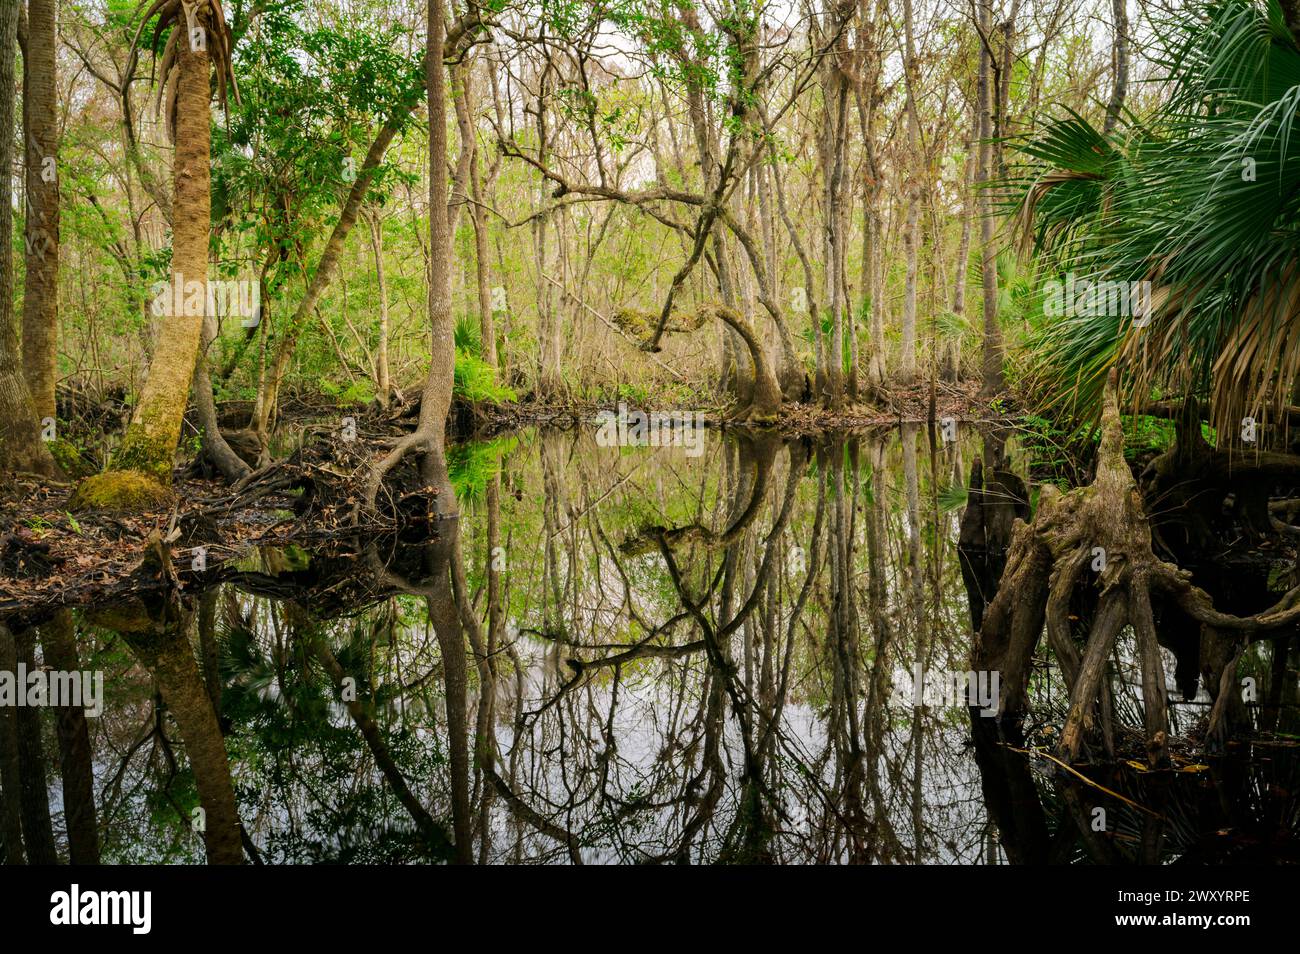 Cypress forest in marshland at Lake Norris Conservationa area, Florida, USA. Stock Photo